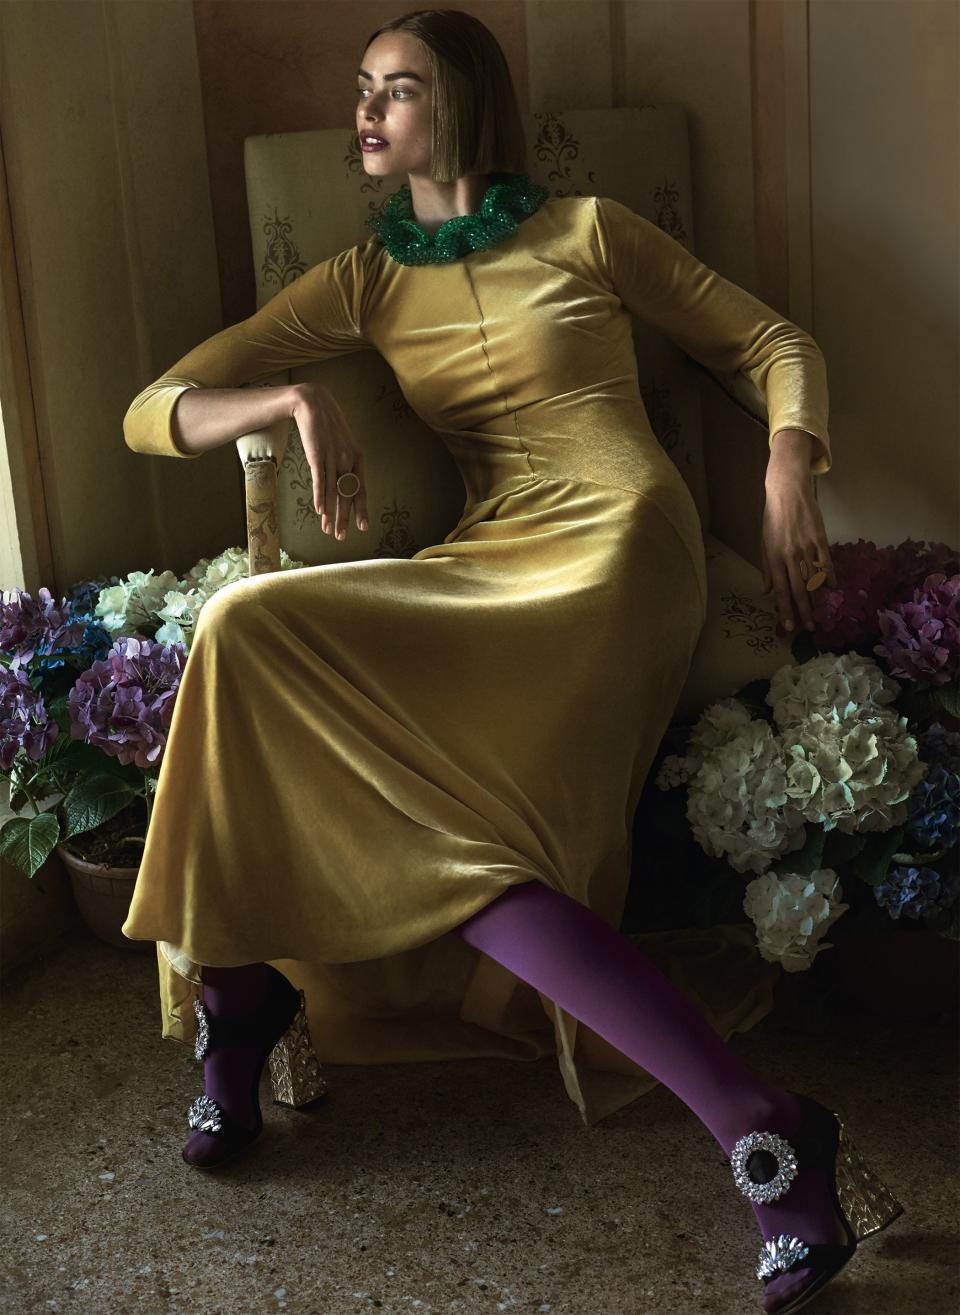 <strong>Natural Attraction</strong> Alberta Ferretti’s daffodil-yellow velvet dress—much like a bouquet of fresh-cut hydrangeas—lifts the spirits and heightens the senses. Alberta Ferretti dress, $1,990; Barneys New York, NYC. Dries Van Noten necklace. Rings by Sabine Mueller and Monika Jakubec. Falke tights. Miu Miu shoes.